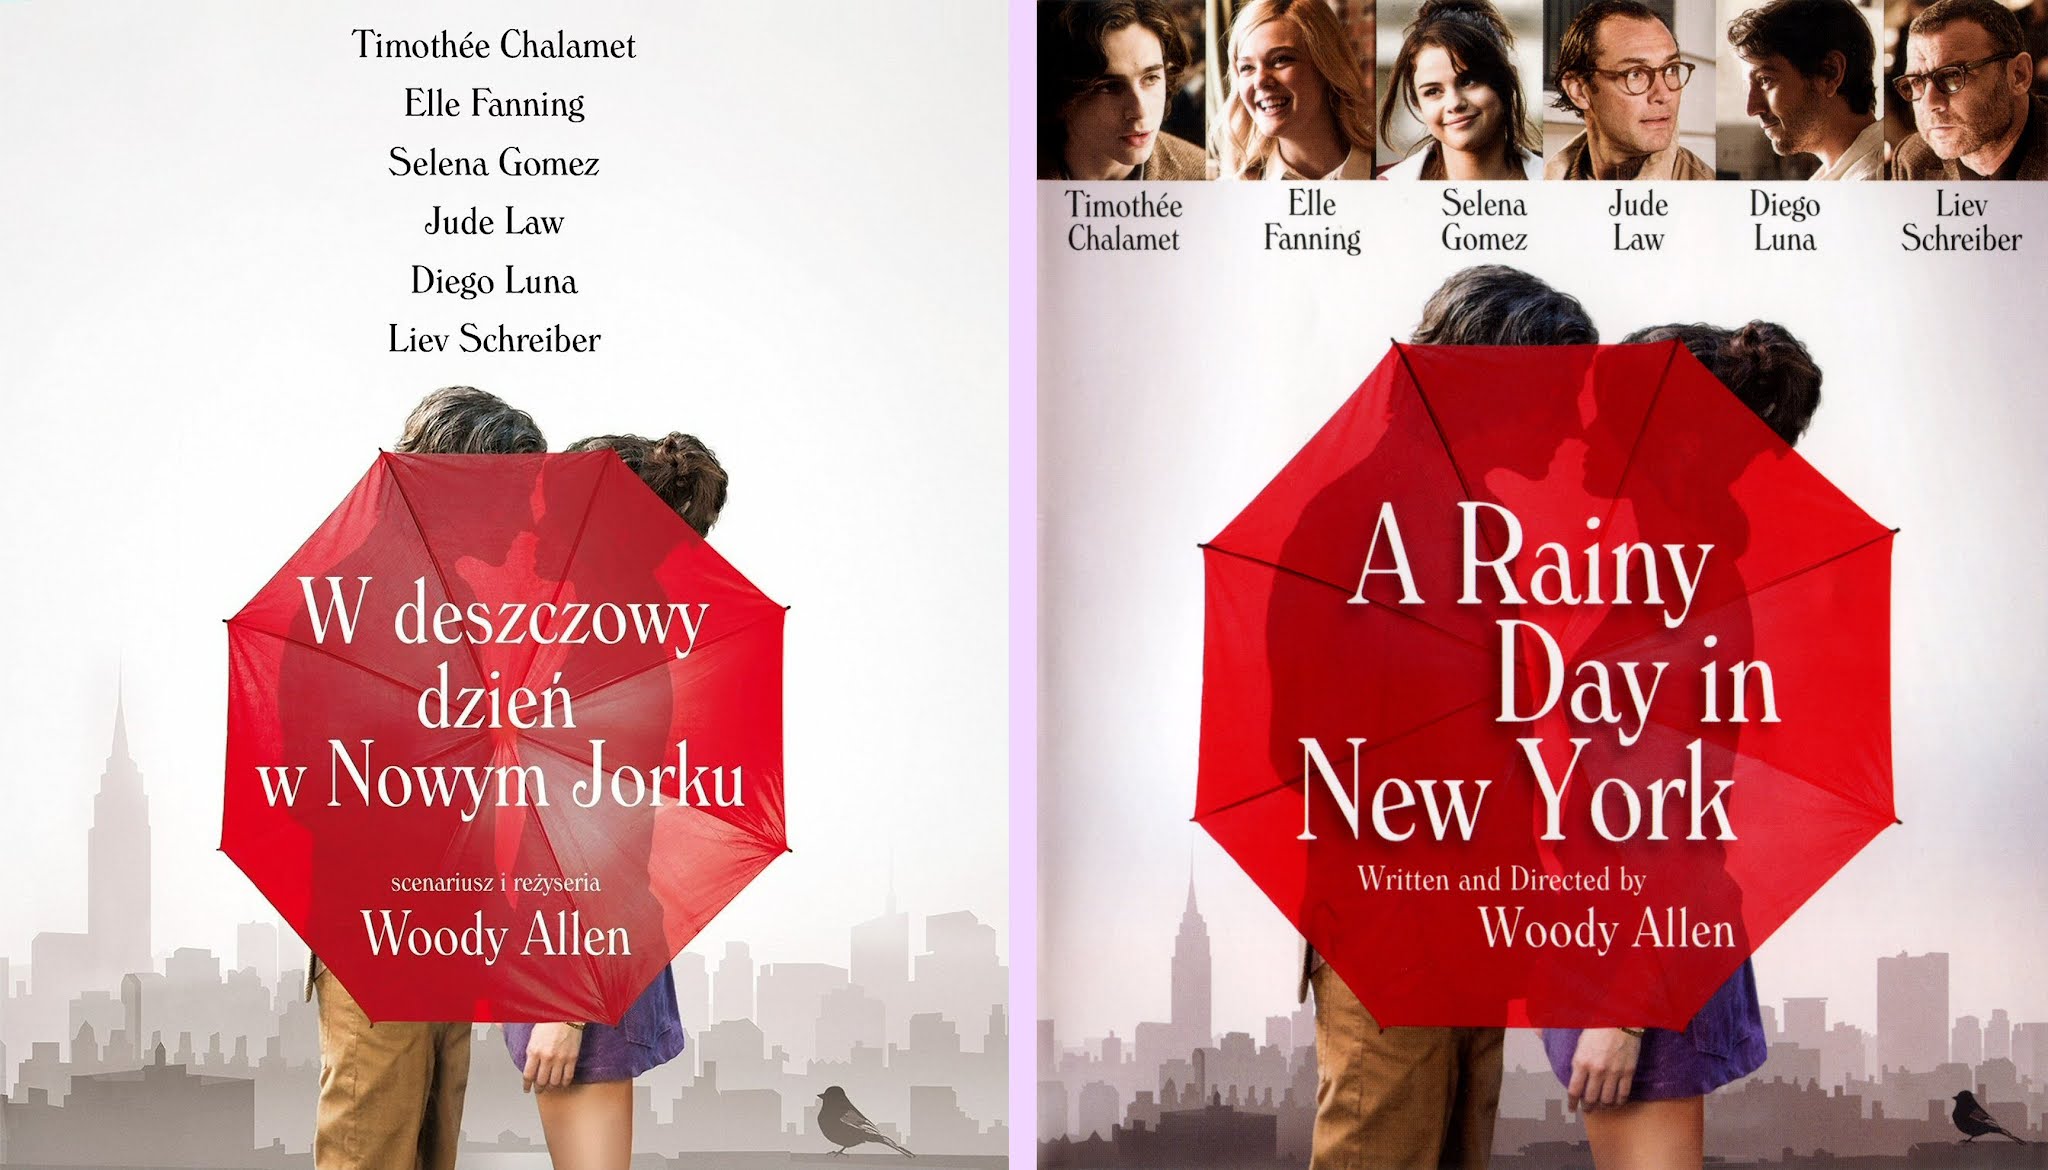 DVD Exotica: You Don't Have To Go To Poland For A Rainy Day In New York